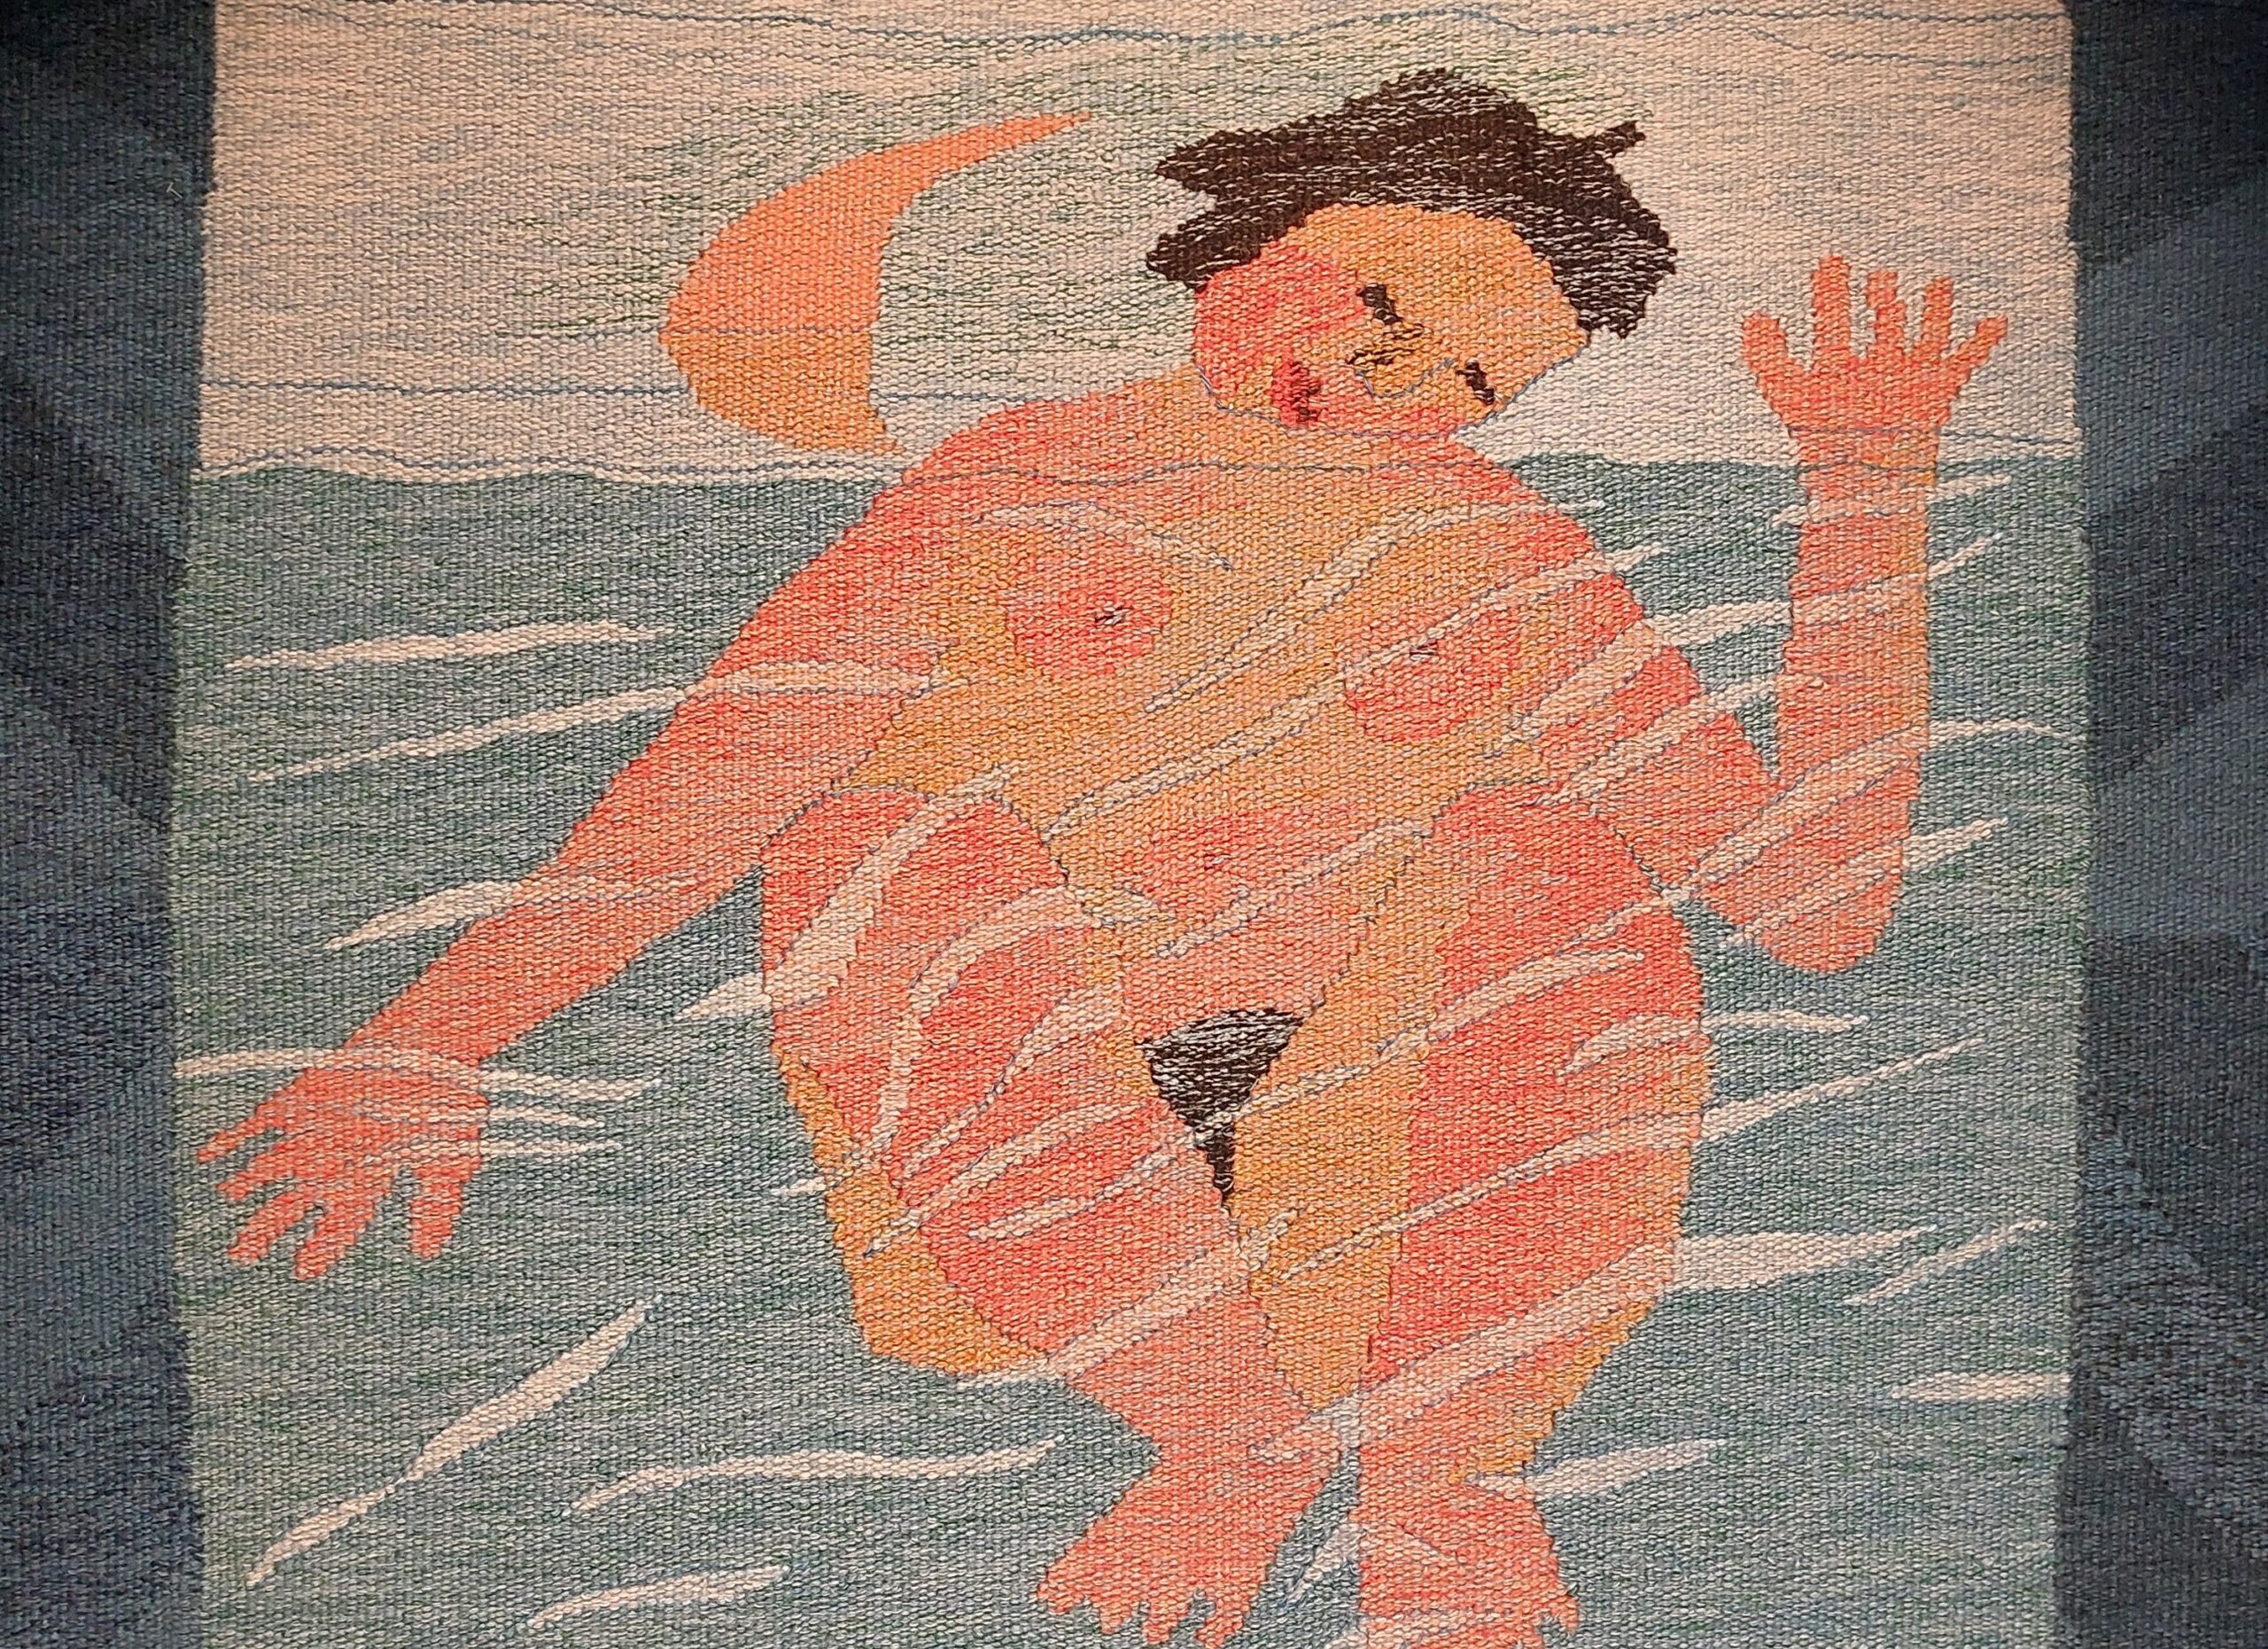 Extract of a textile artwork by Hildur Hakonardottir showing a naked woman in the sea with a half moon in the sky